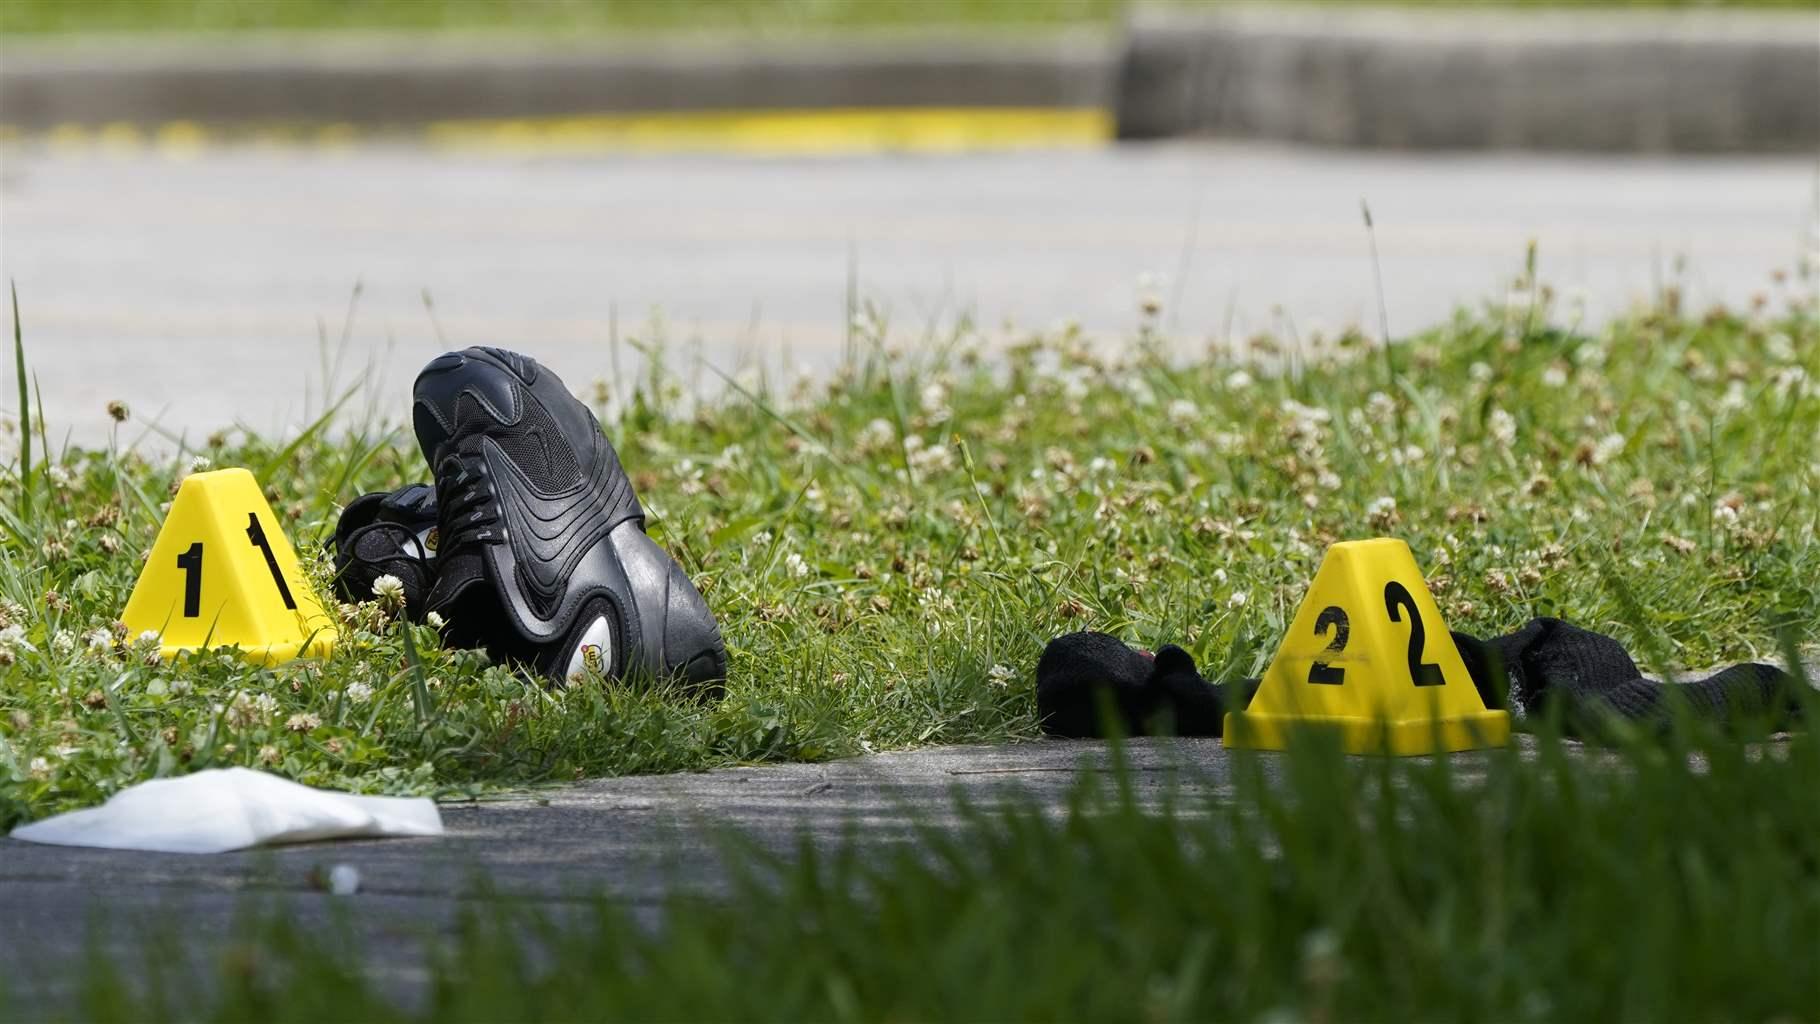 Shoes and clothing sit near evidence markers at the crime scene of a shooting at Xavier University in New Orleans, Tuesday, May 31, 2022.